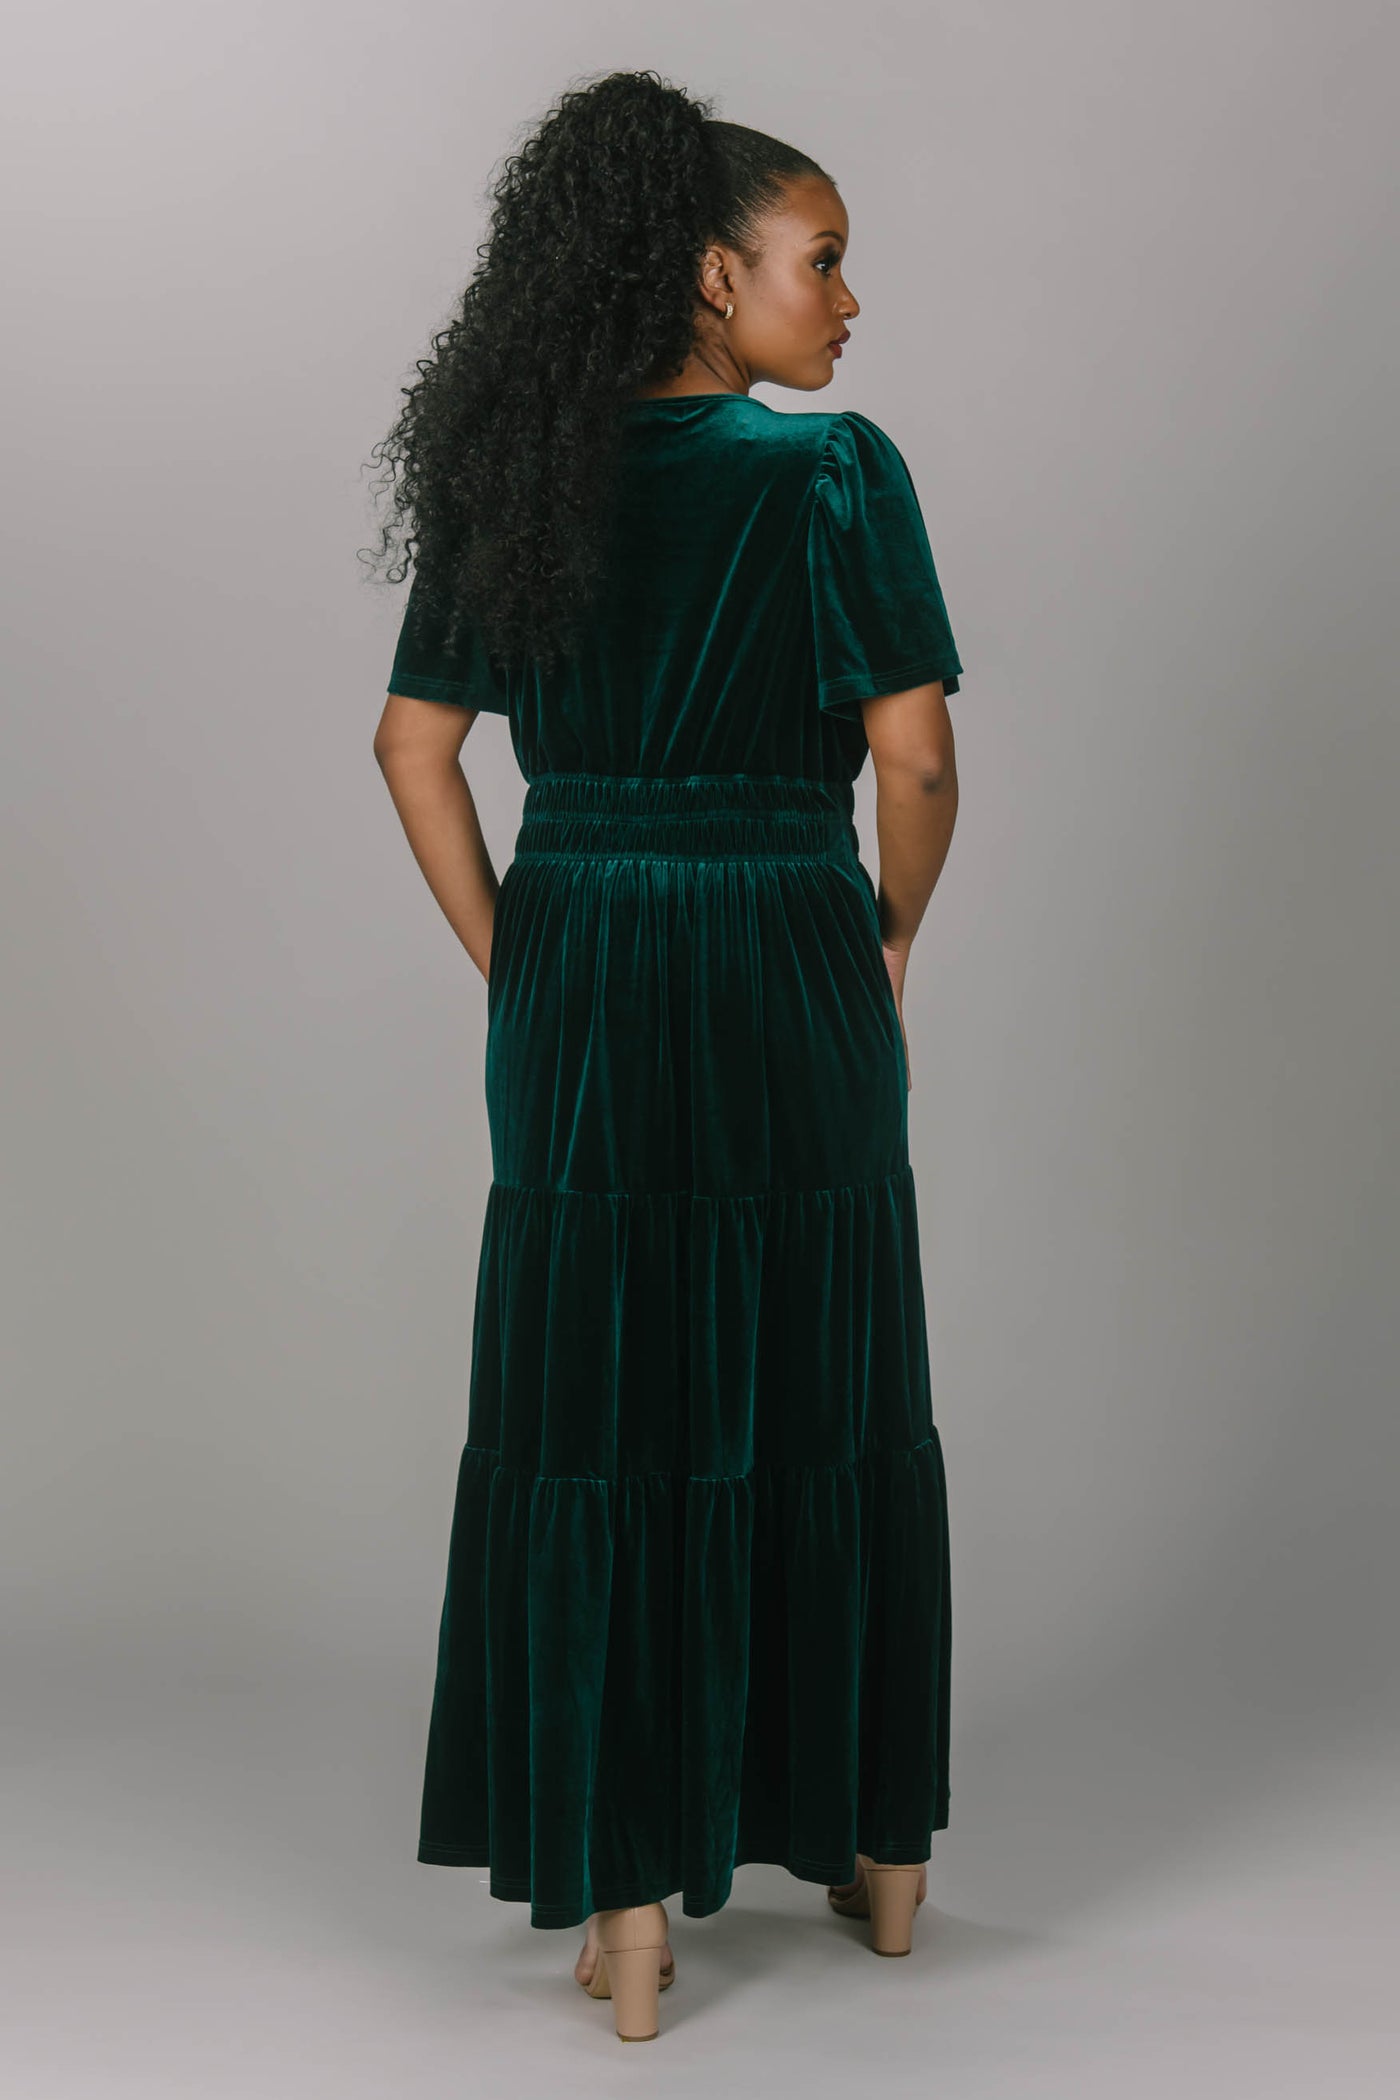 Back view of modest everyday and bridesmaid emerald colored dress. This dress is velvet, has a v-neckline, and a tiered skirt. This modest dress for women is floor length and super comfortable.